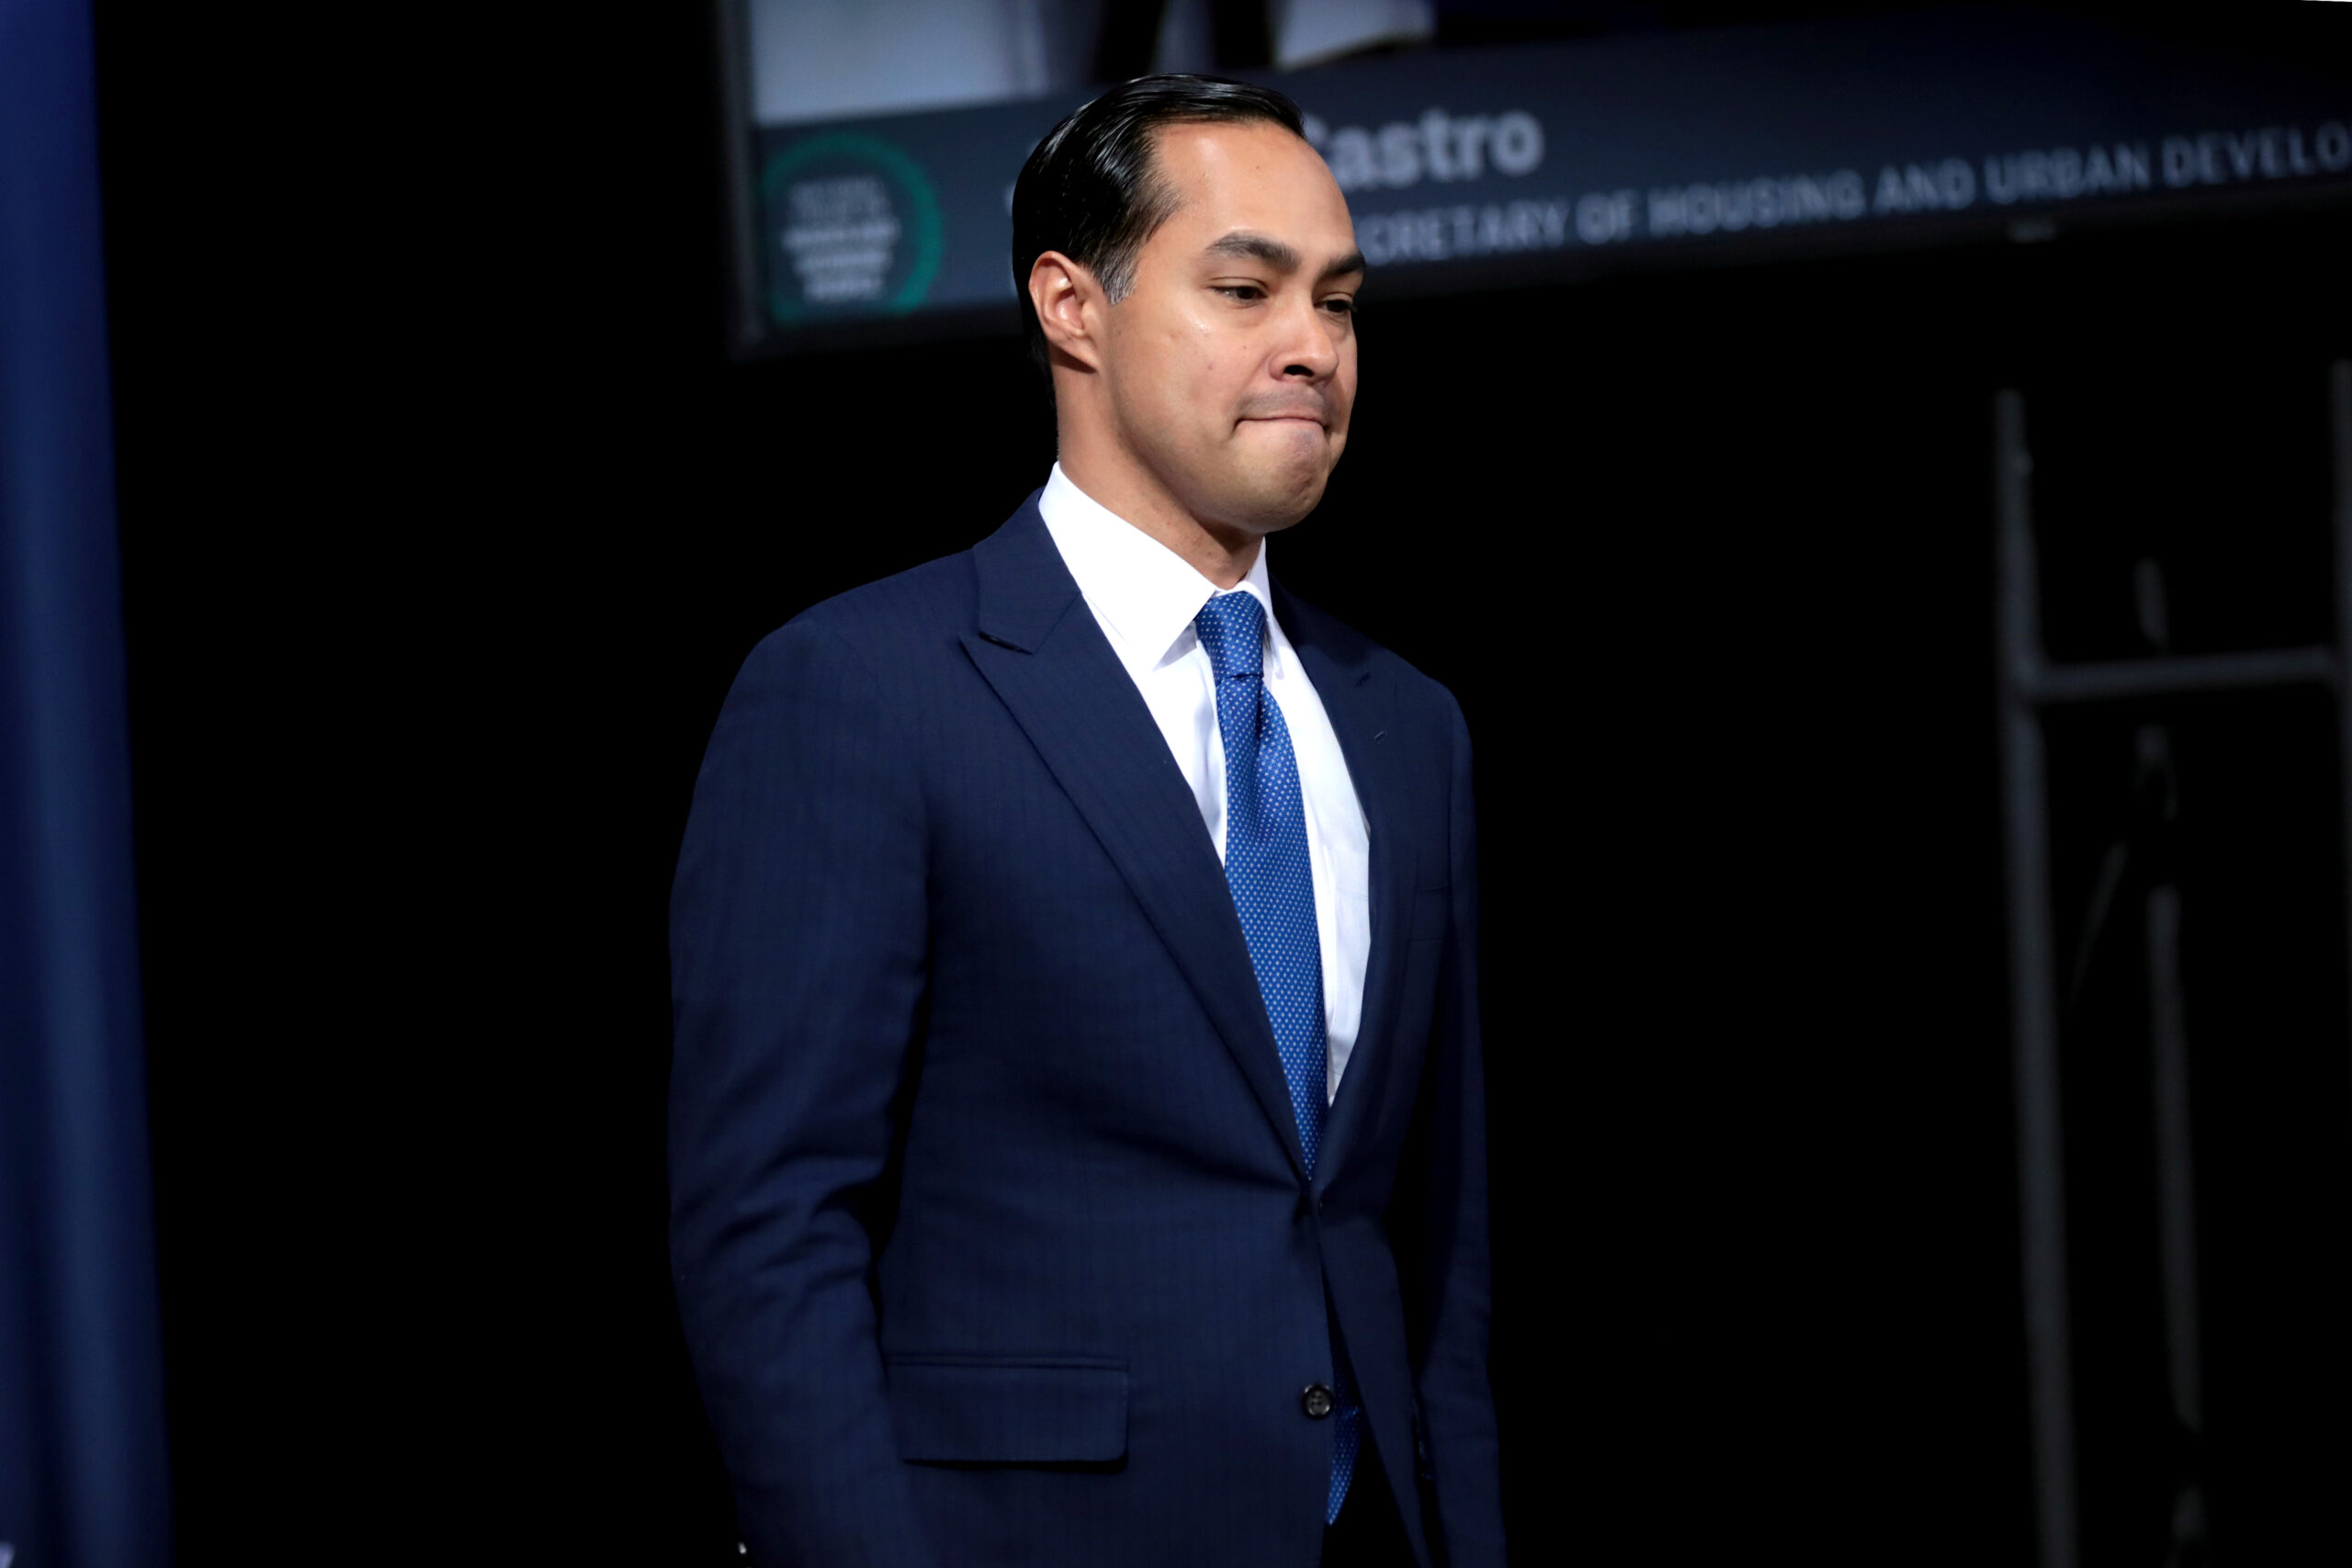 Julián Castro dropped out of the presidential primary on January 2, 2020